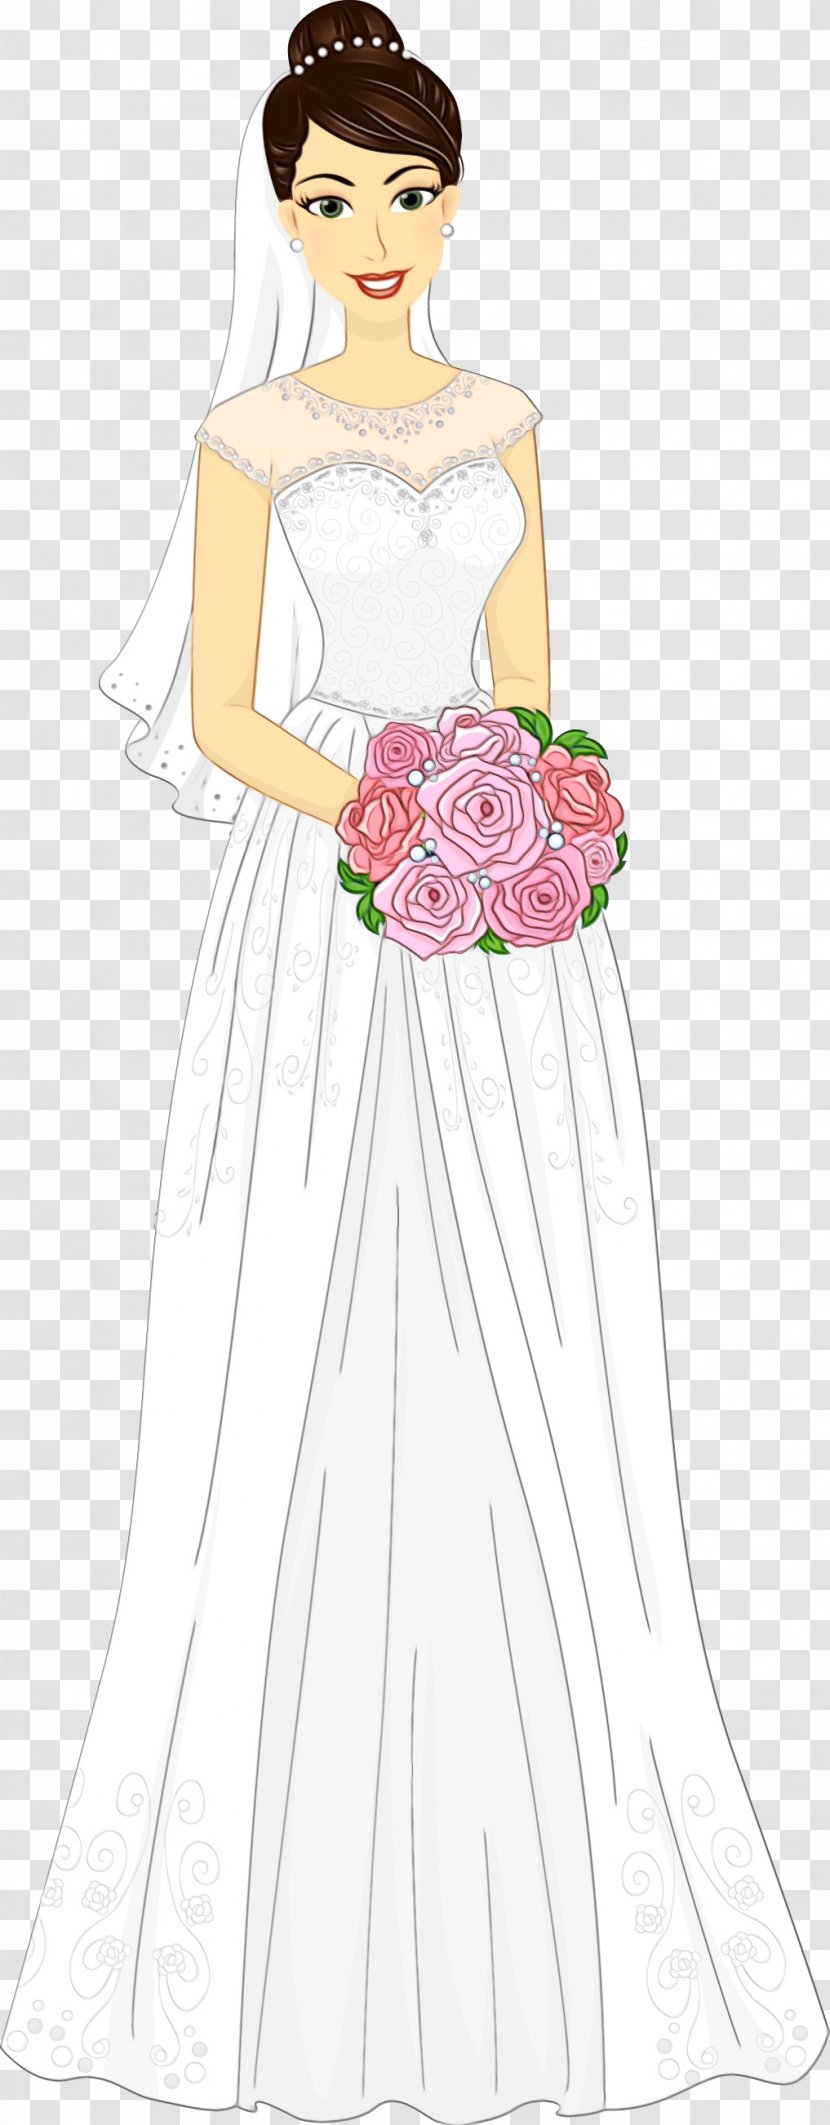 Bouquet Of Flowers Drawing - Flower - Aline Victorian Fashion Transparent PNG